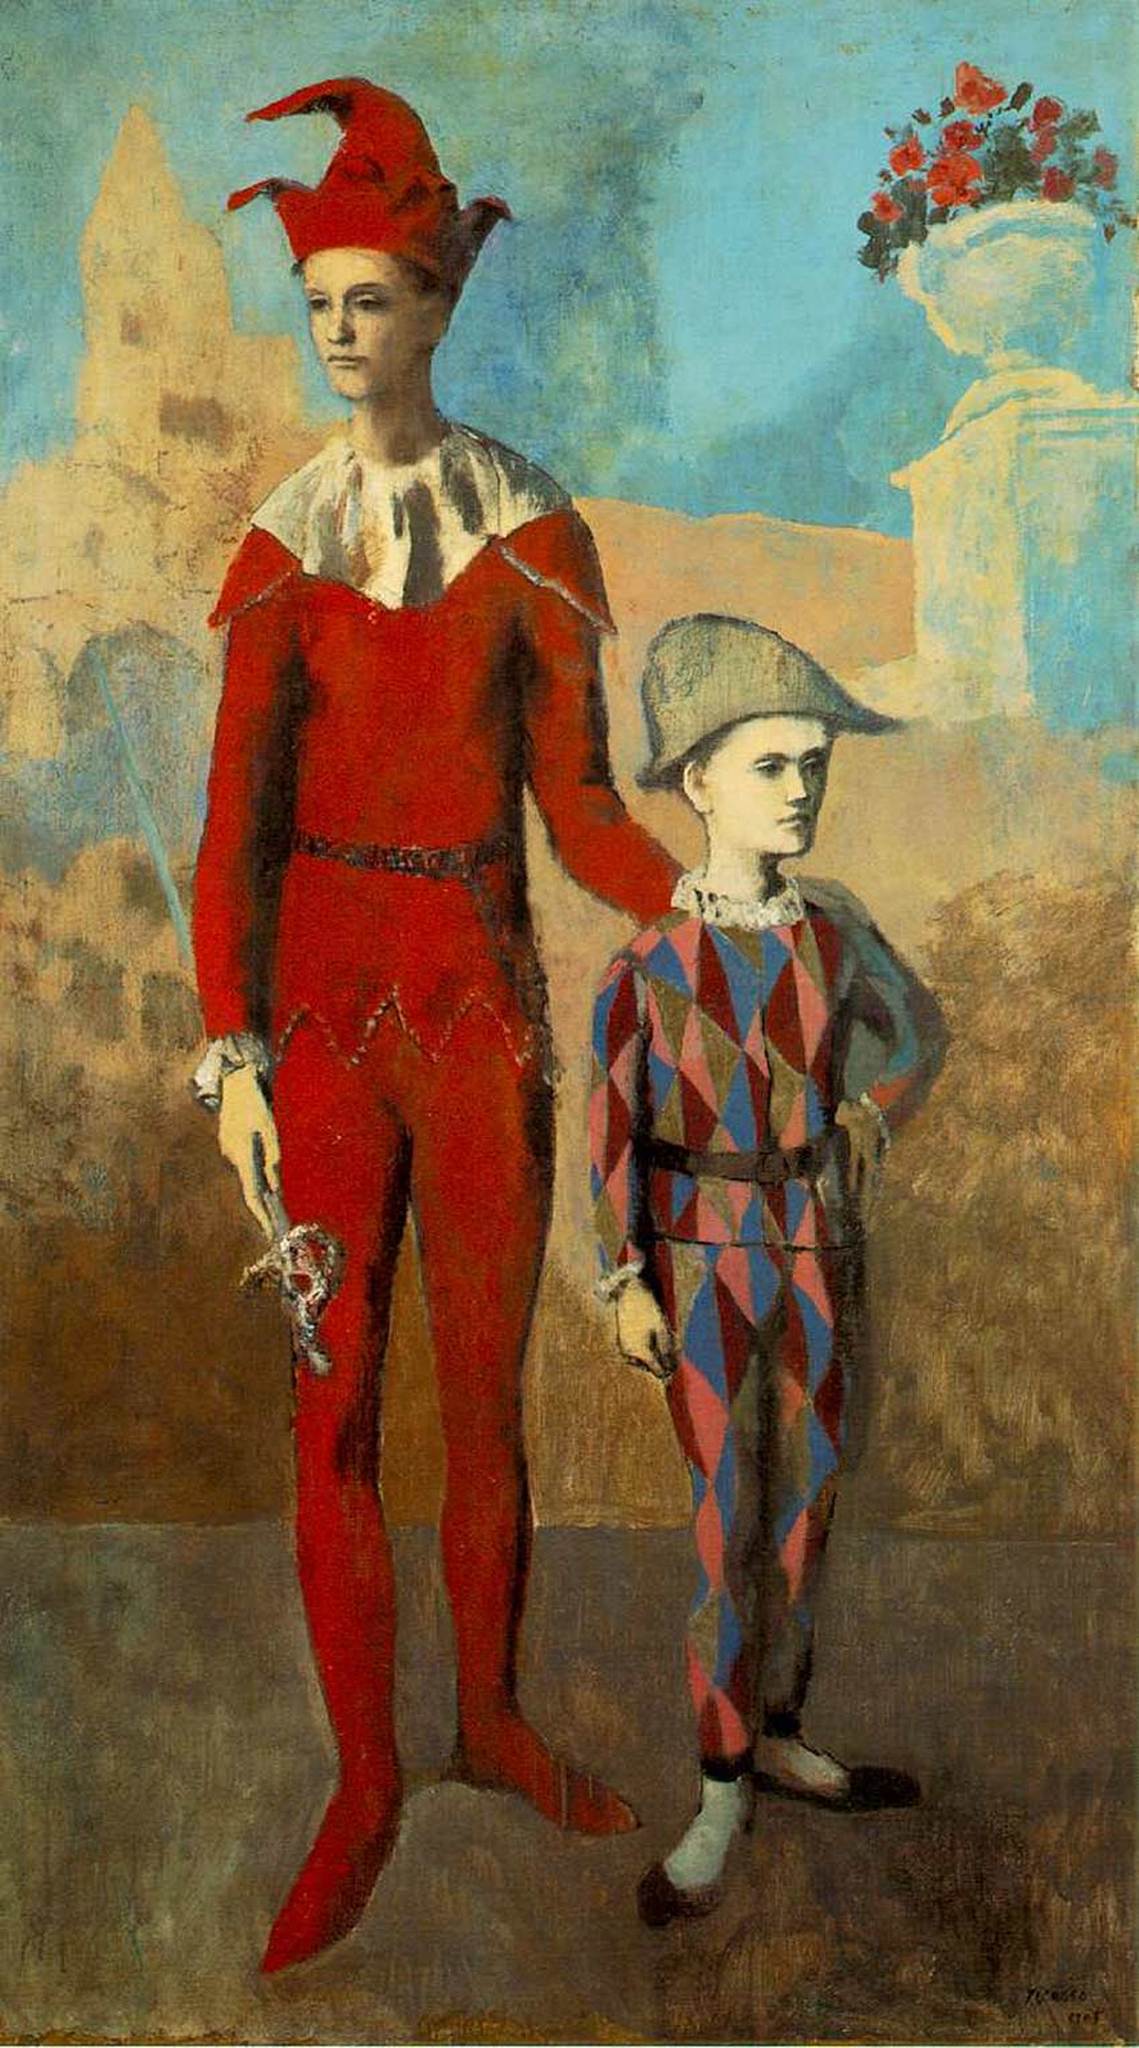 Acrobat & Young Harlequin 1905 Signed Picasso - 17" x 22" Fine Art Print